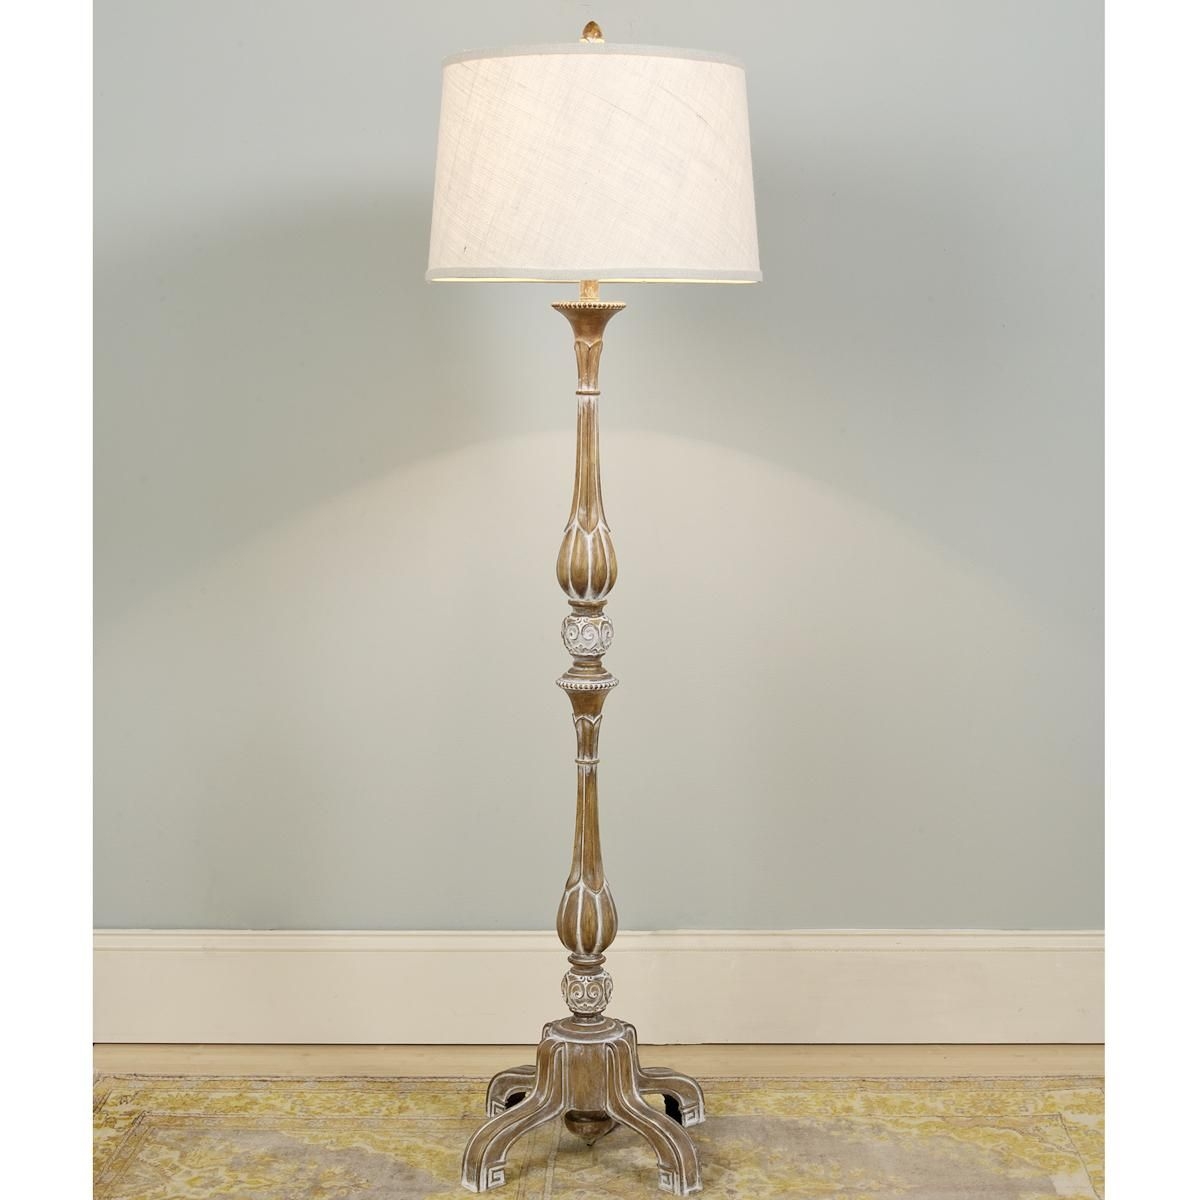 French country floor lamp